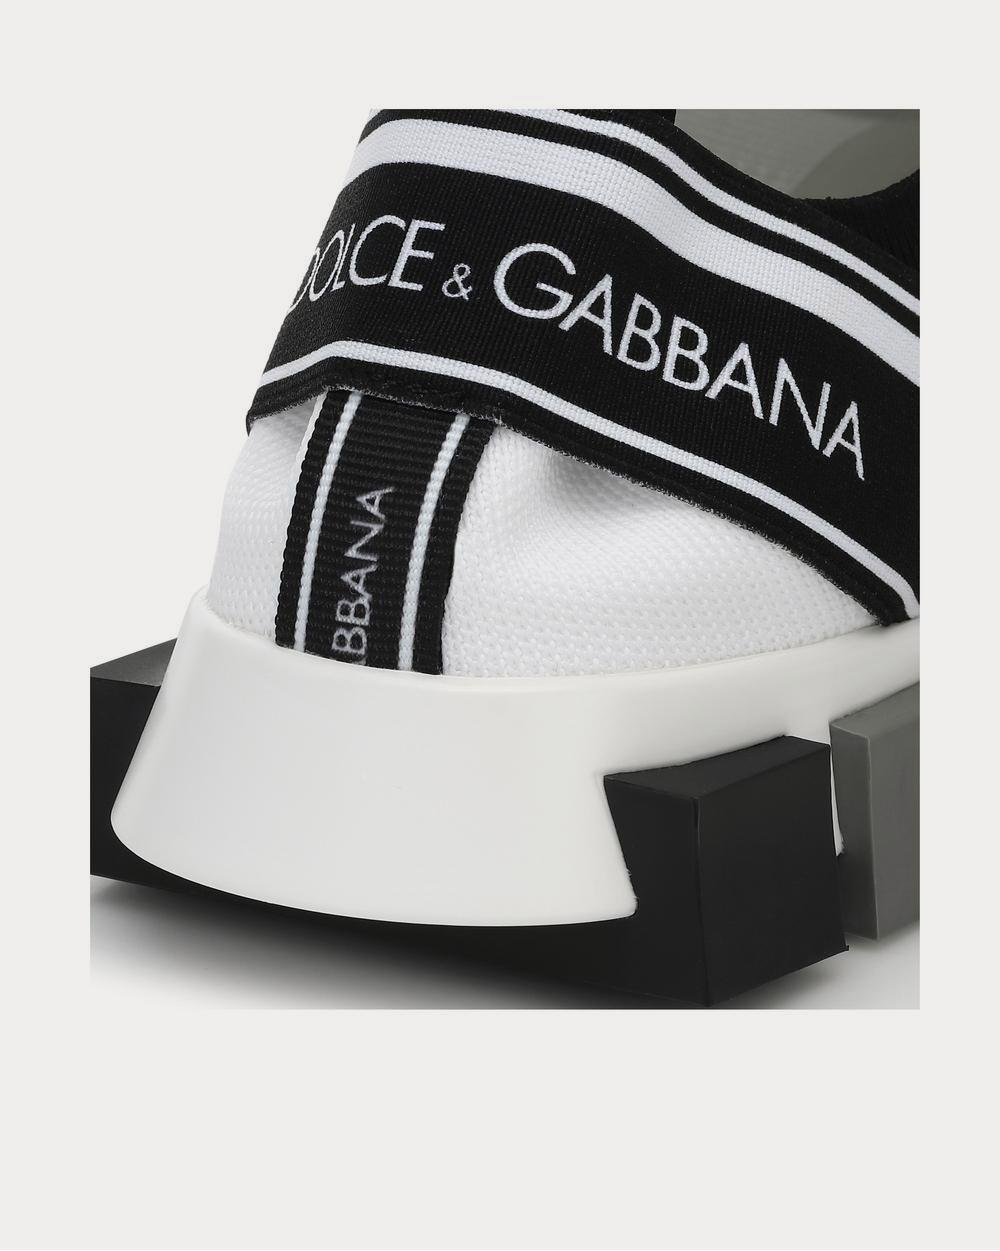 Dolce & Gabbana - Sorrento White low top Sneakers